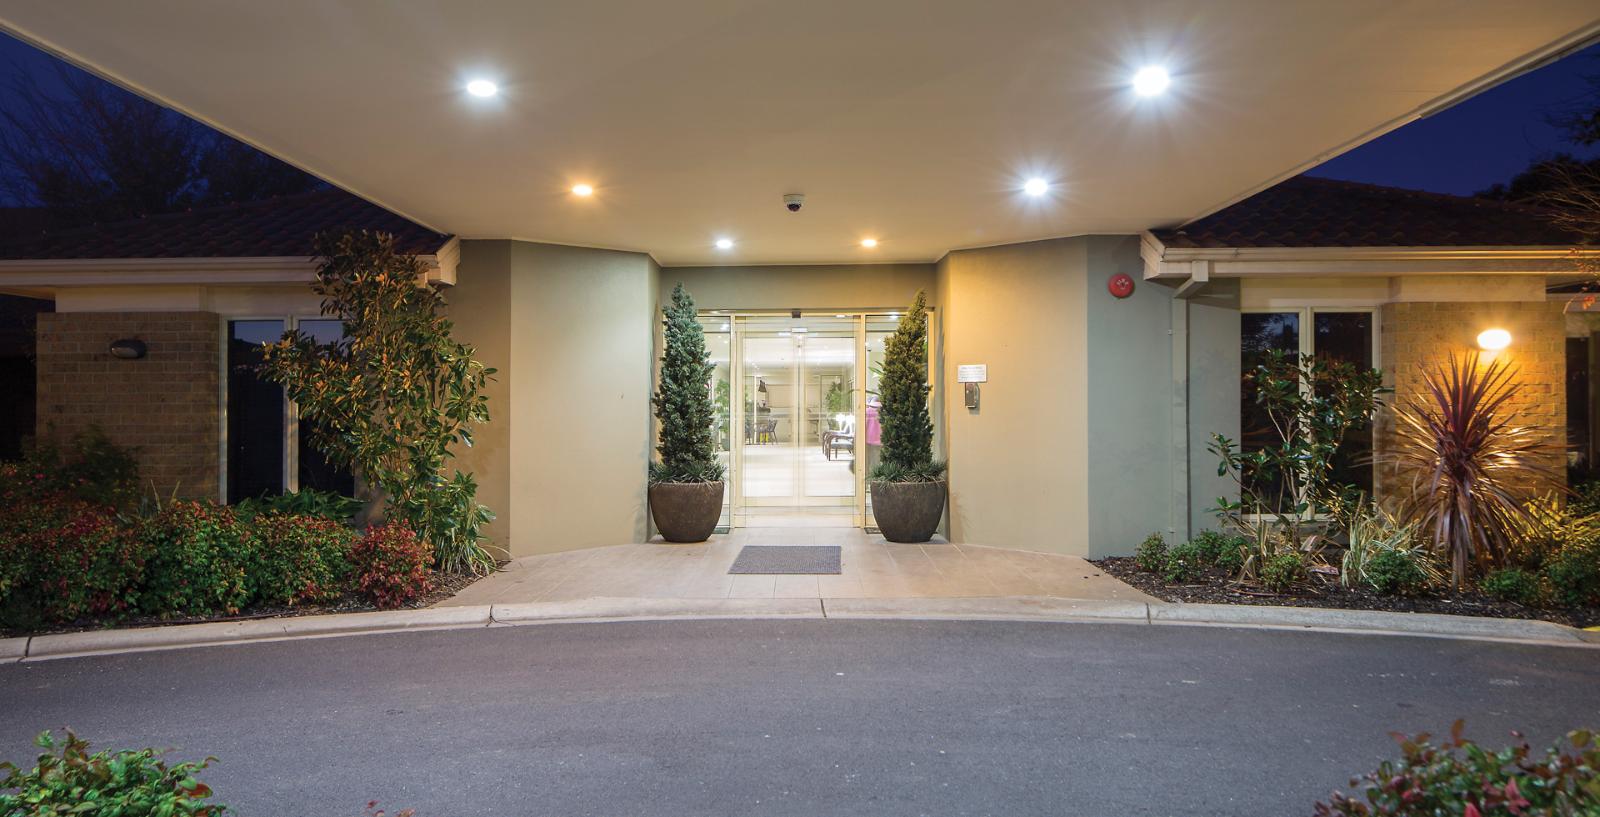 Arcare_aged_care_knox_wantirna_south entrance foyer at dusk 01